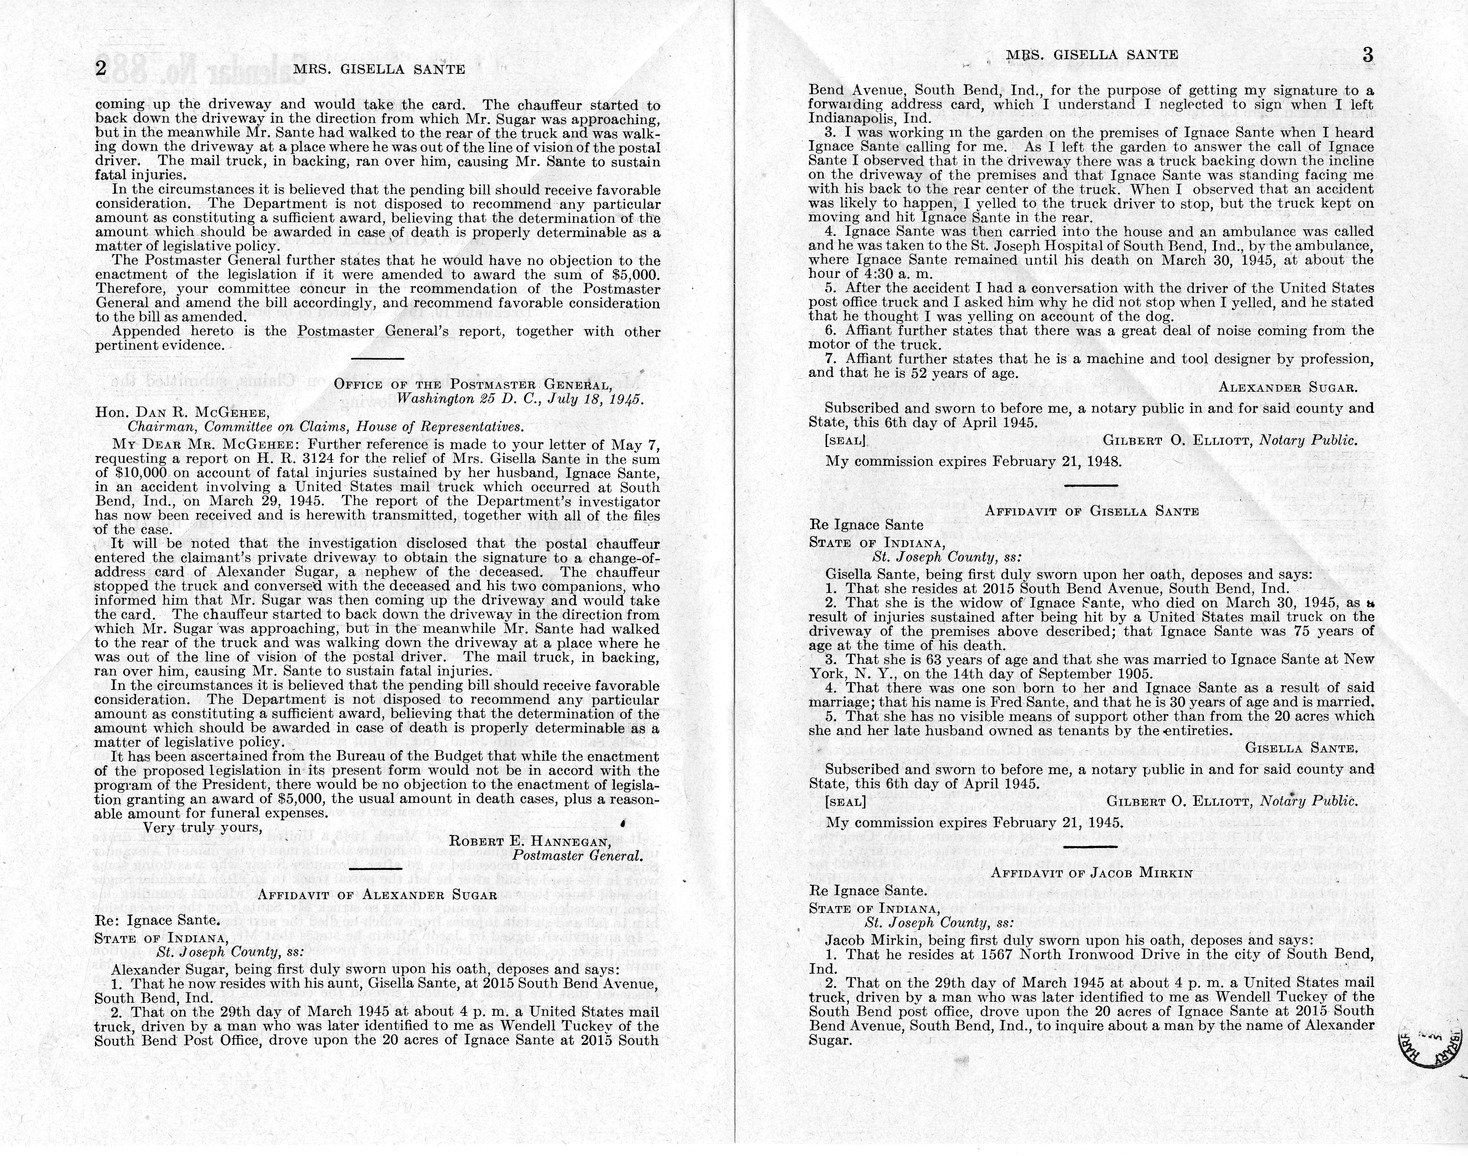 Memorandum from Frederick J. Bailey to M. C. Latta, H.R. 3124, For the Relief of Mrs. Gisella Sante, with Attachments